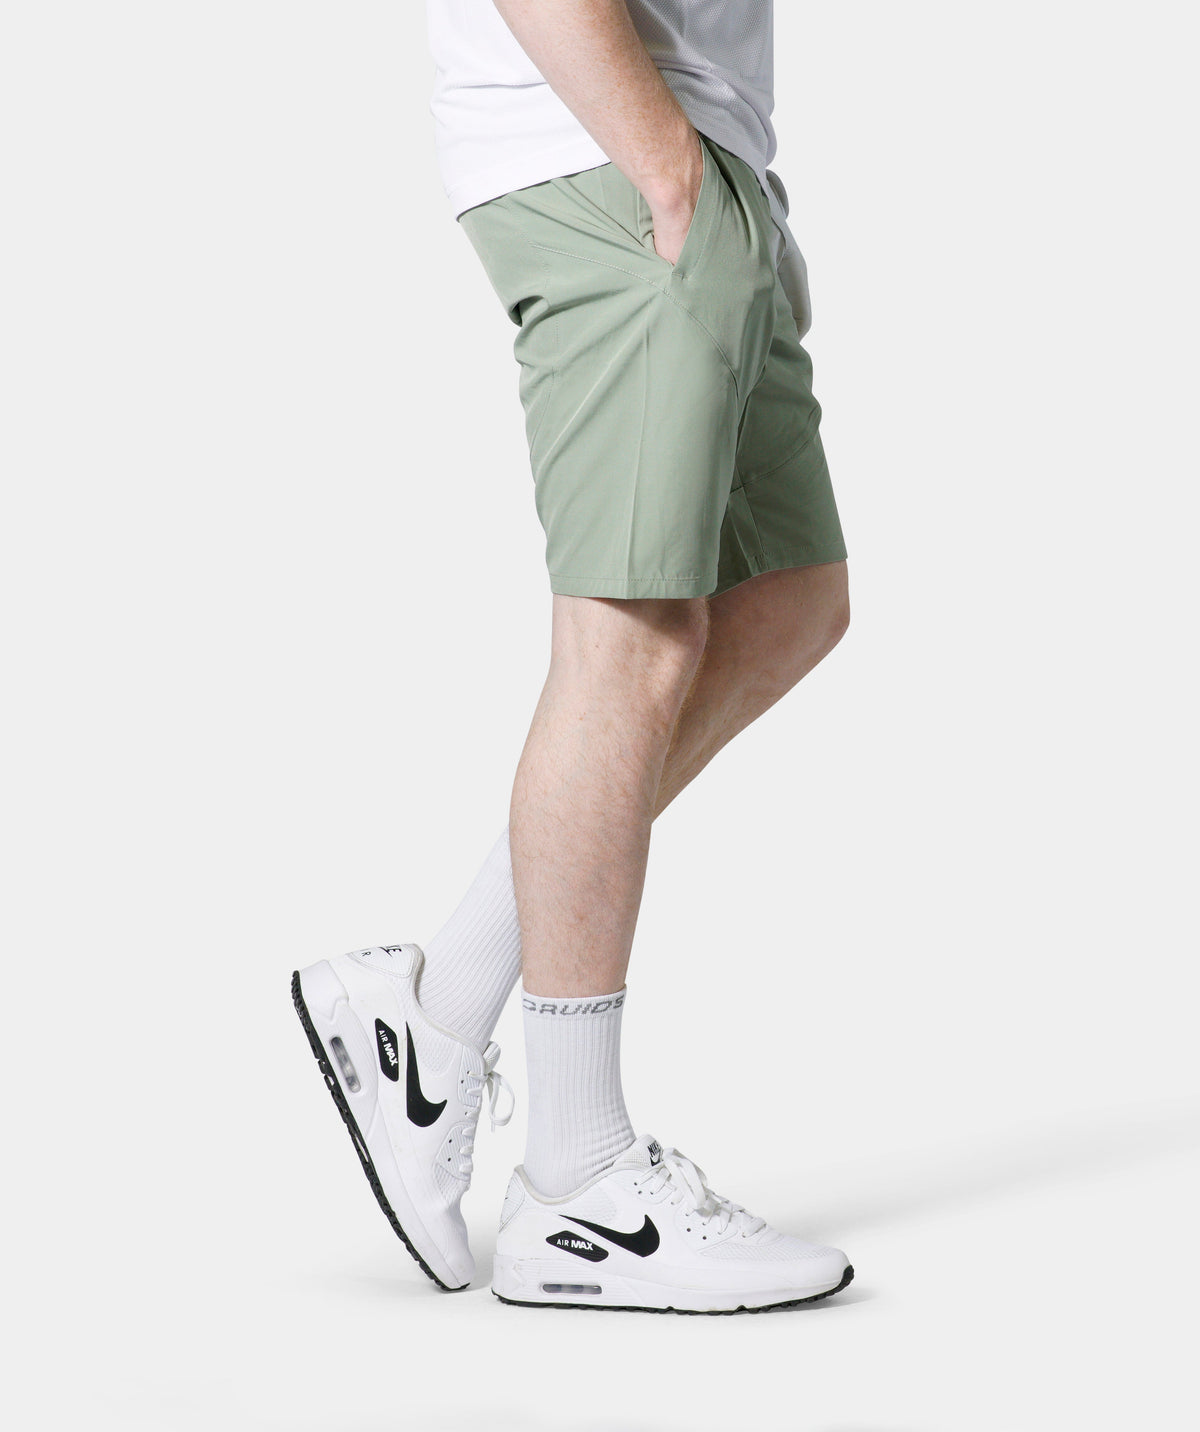 LUXE GOLF SHORTS - SAGE